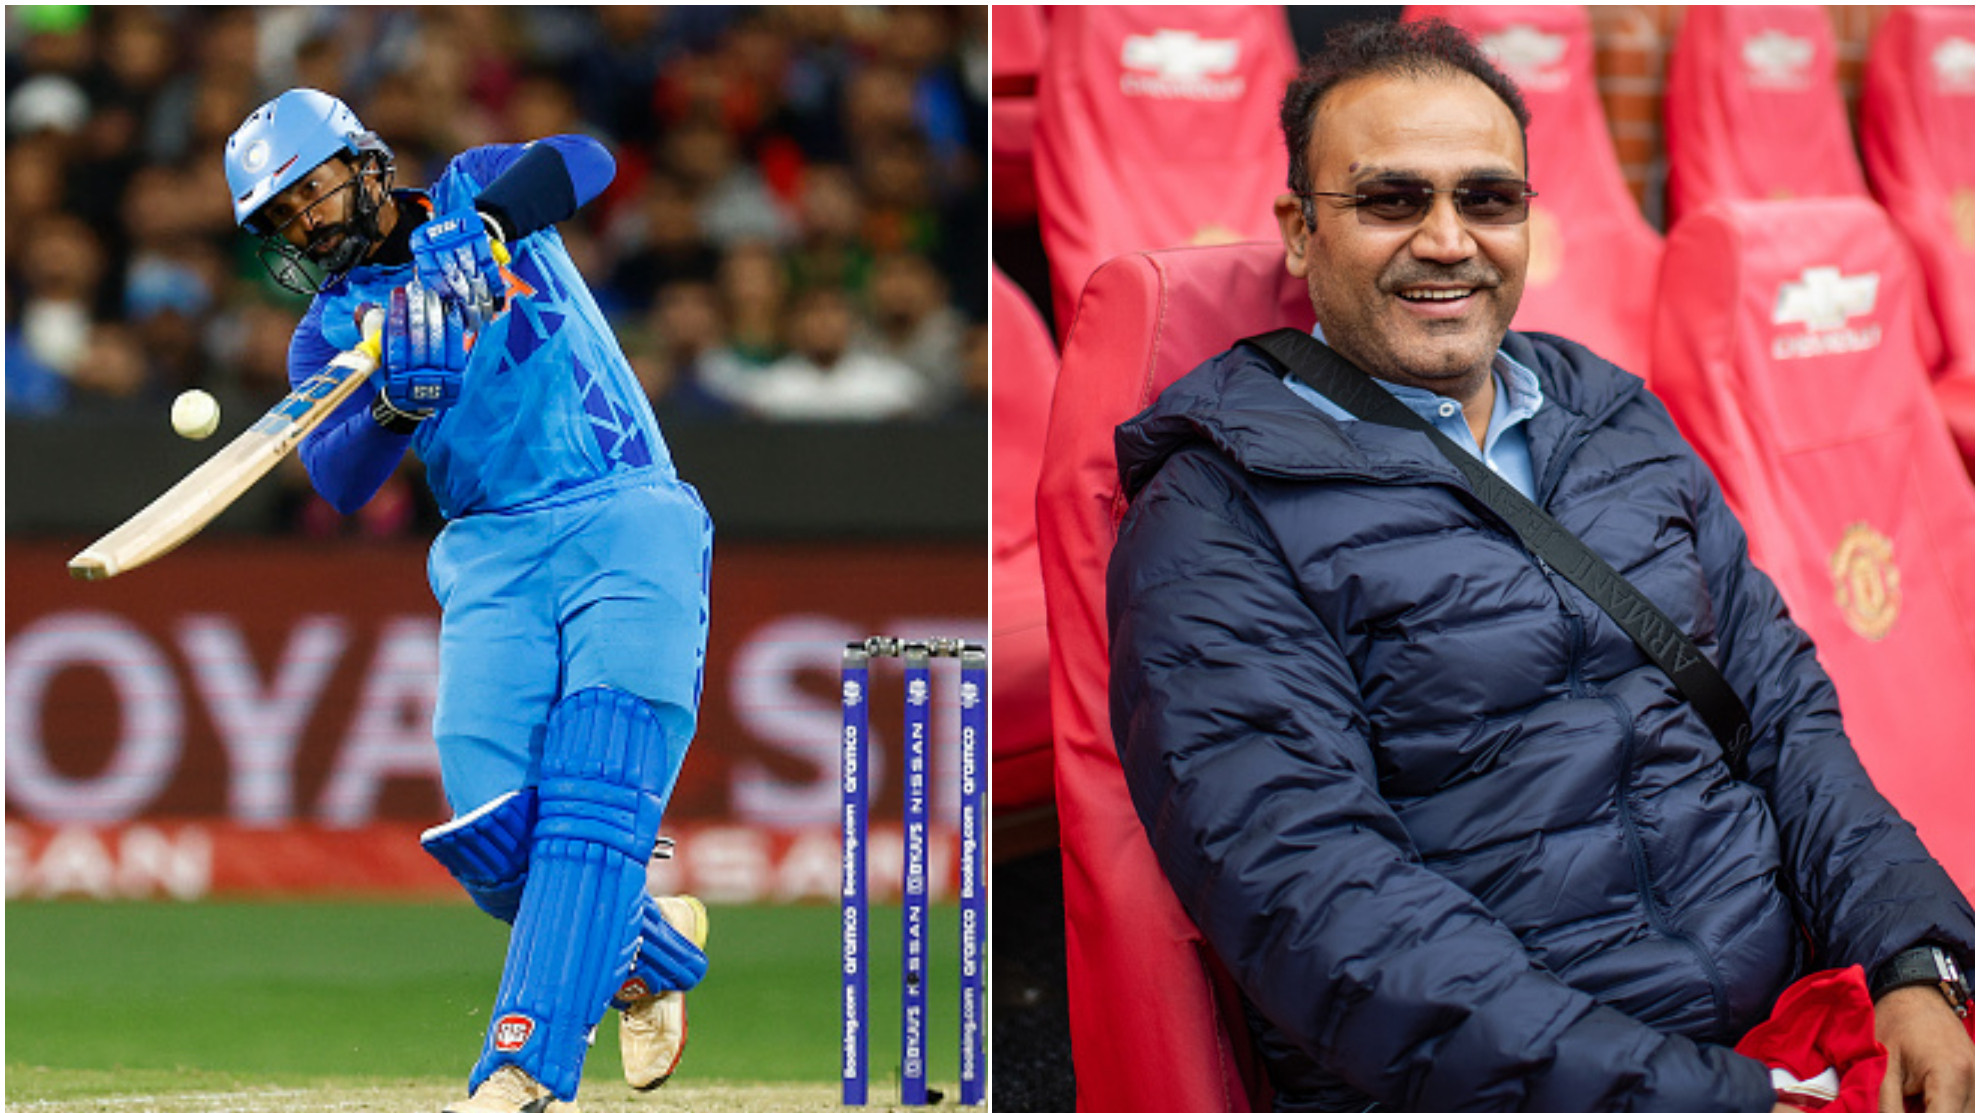 T20 World Cup 2022: “If you have gambled on Karthik, then you've got to play him until the end”- opines Virender Sehwag